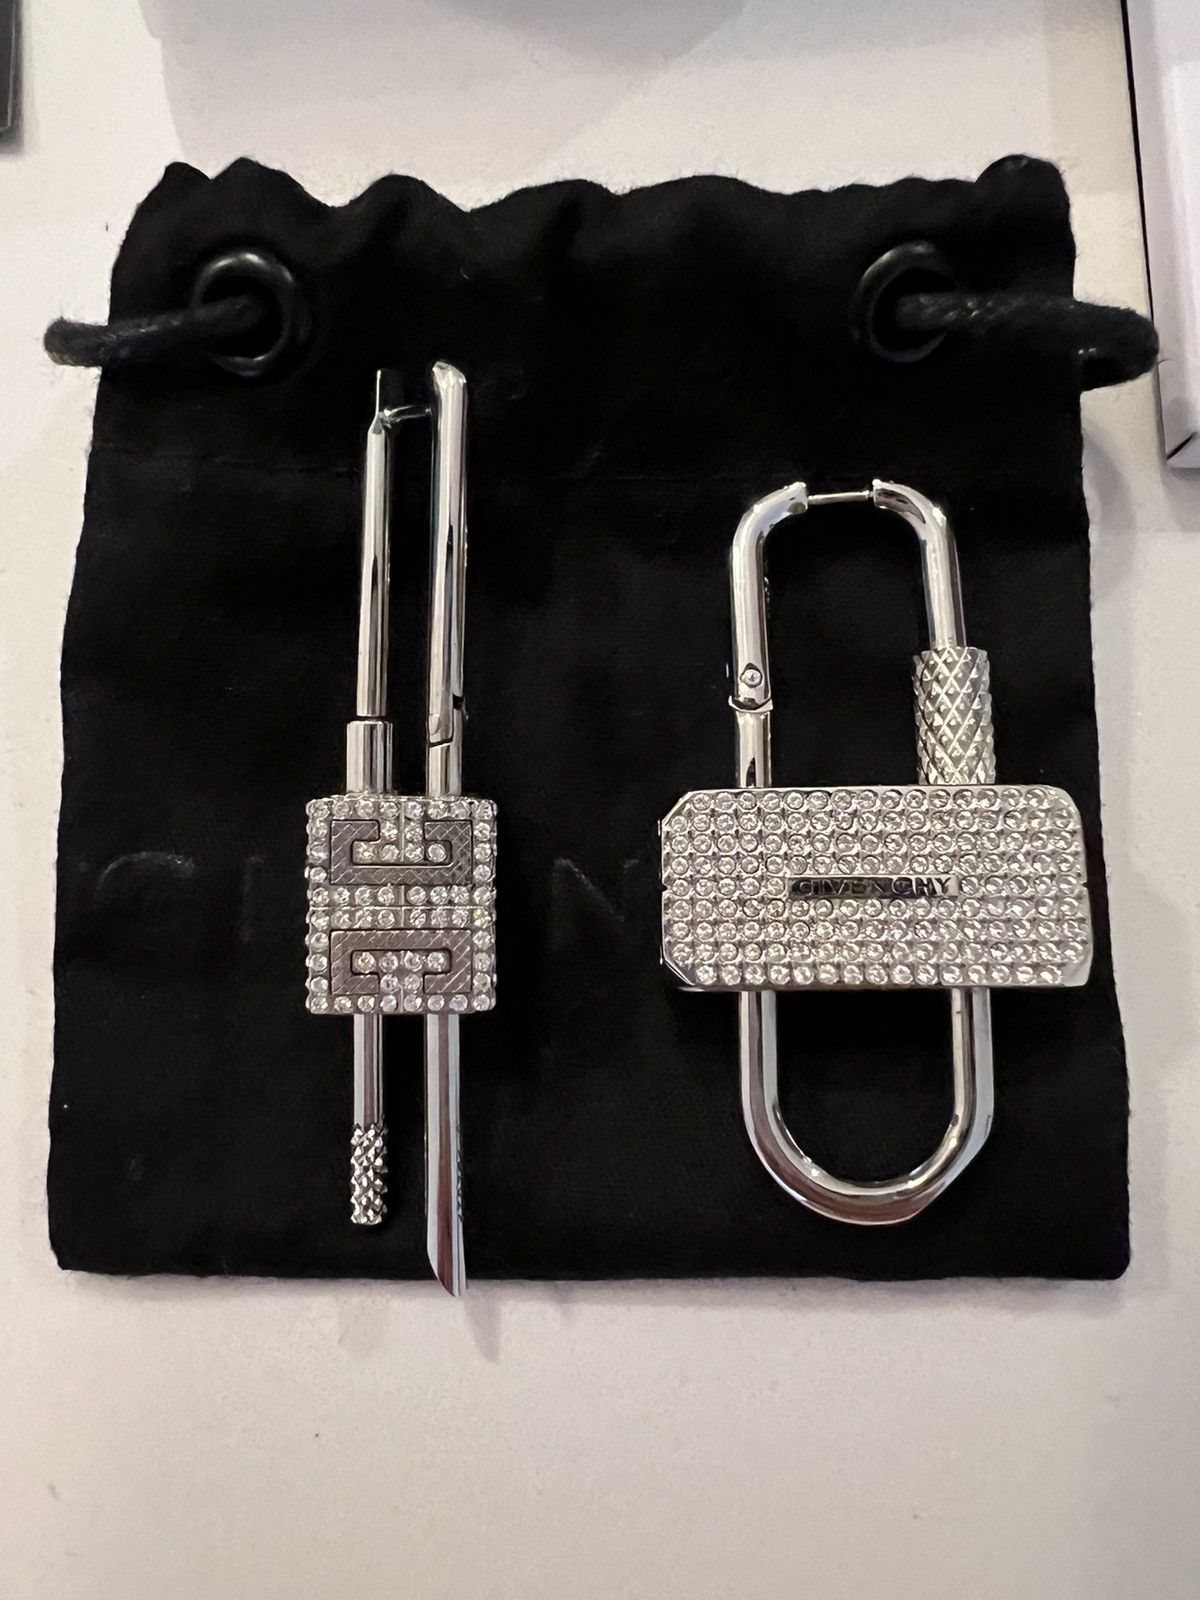 Silver Lock Crystal Earrings by Givenchy on Sale